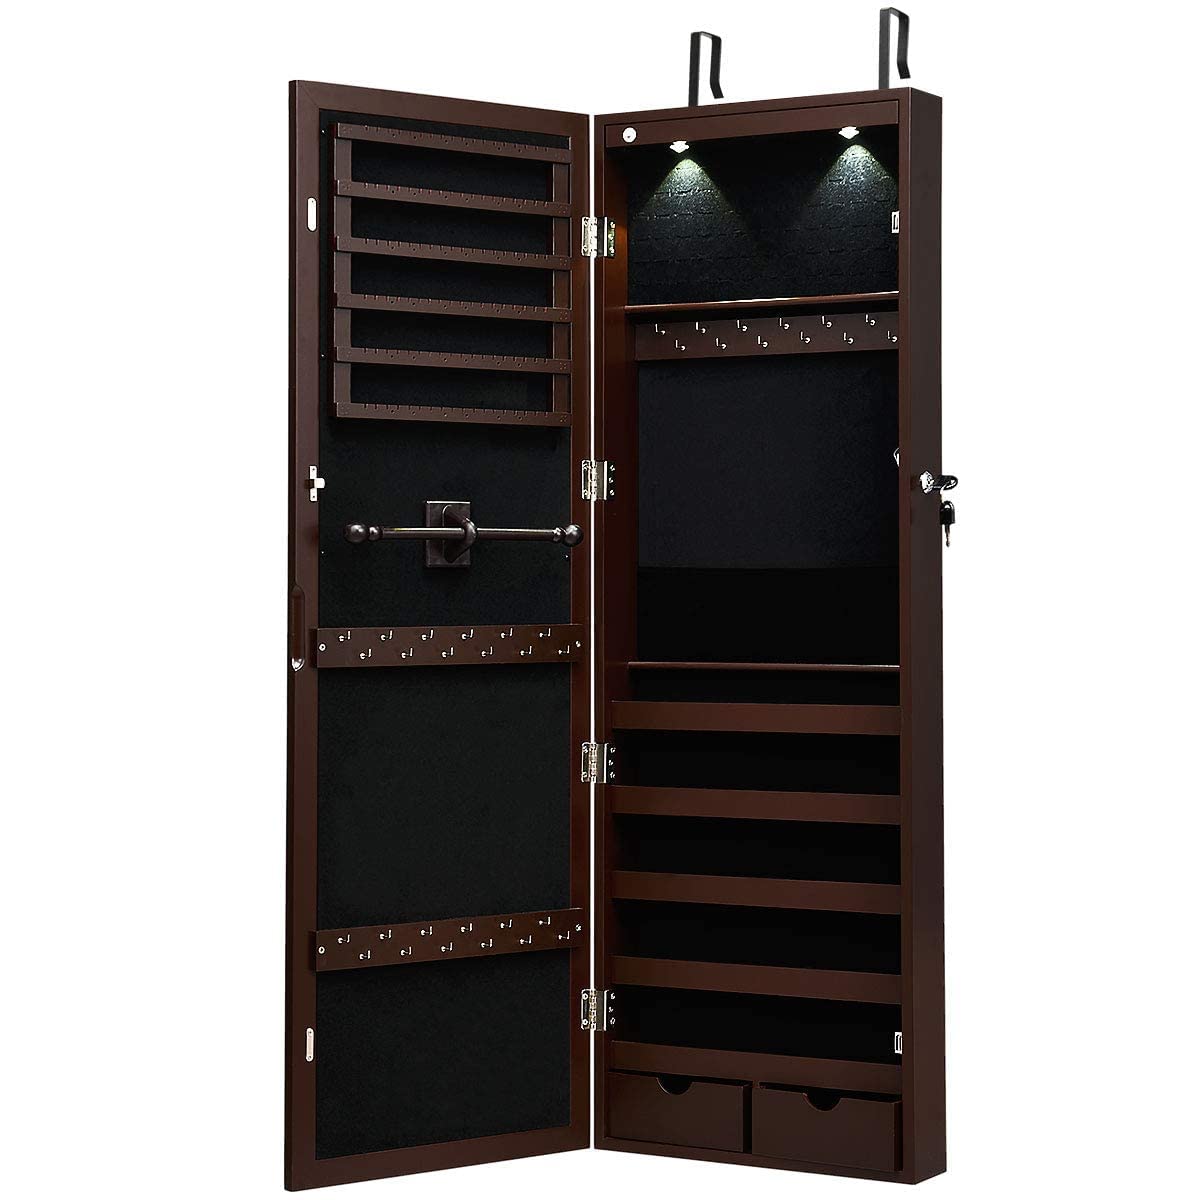 Giantex Jewelry Armoire Wall Door Mounted, Lockable Jewelry Cabinet with 42.5'' Full Length Mirror, 2 LEDs Jewelry Organizer Box with 2 Drawers,